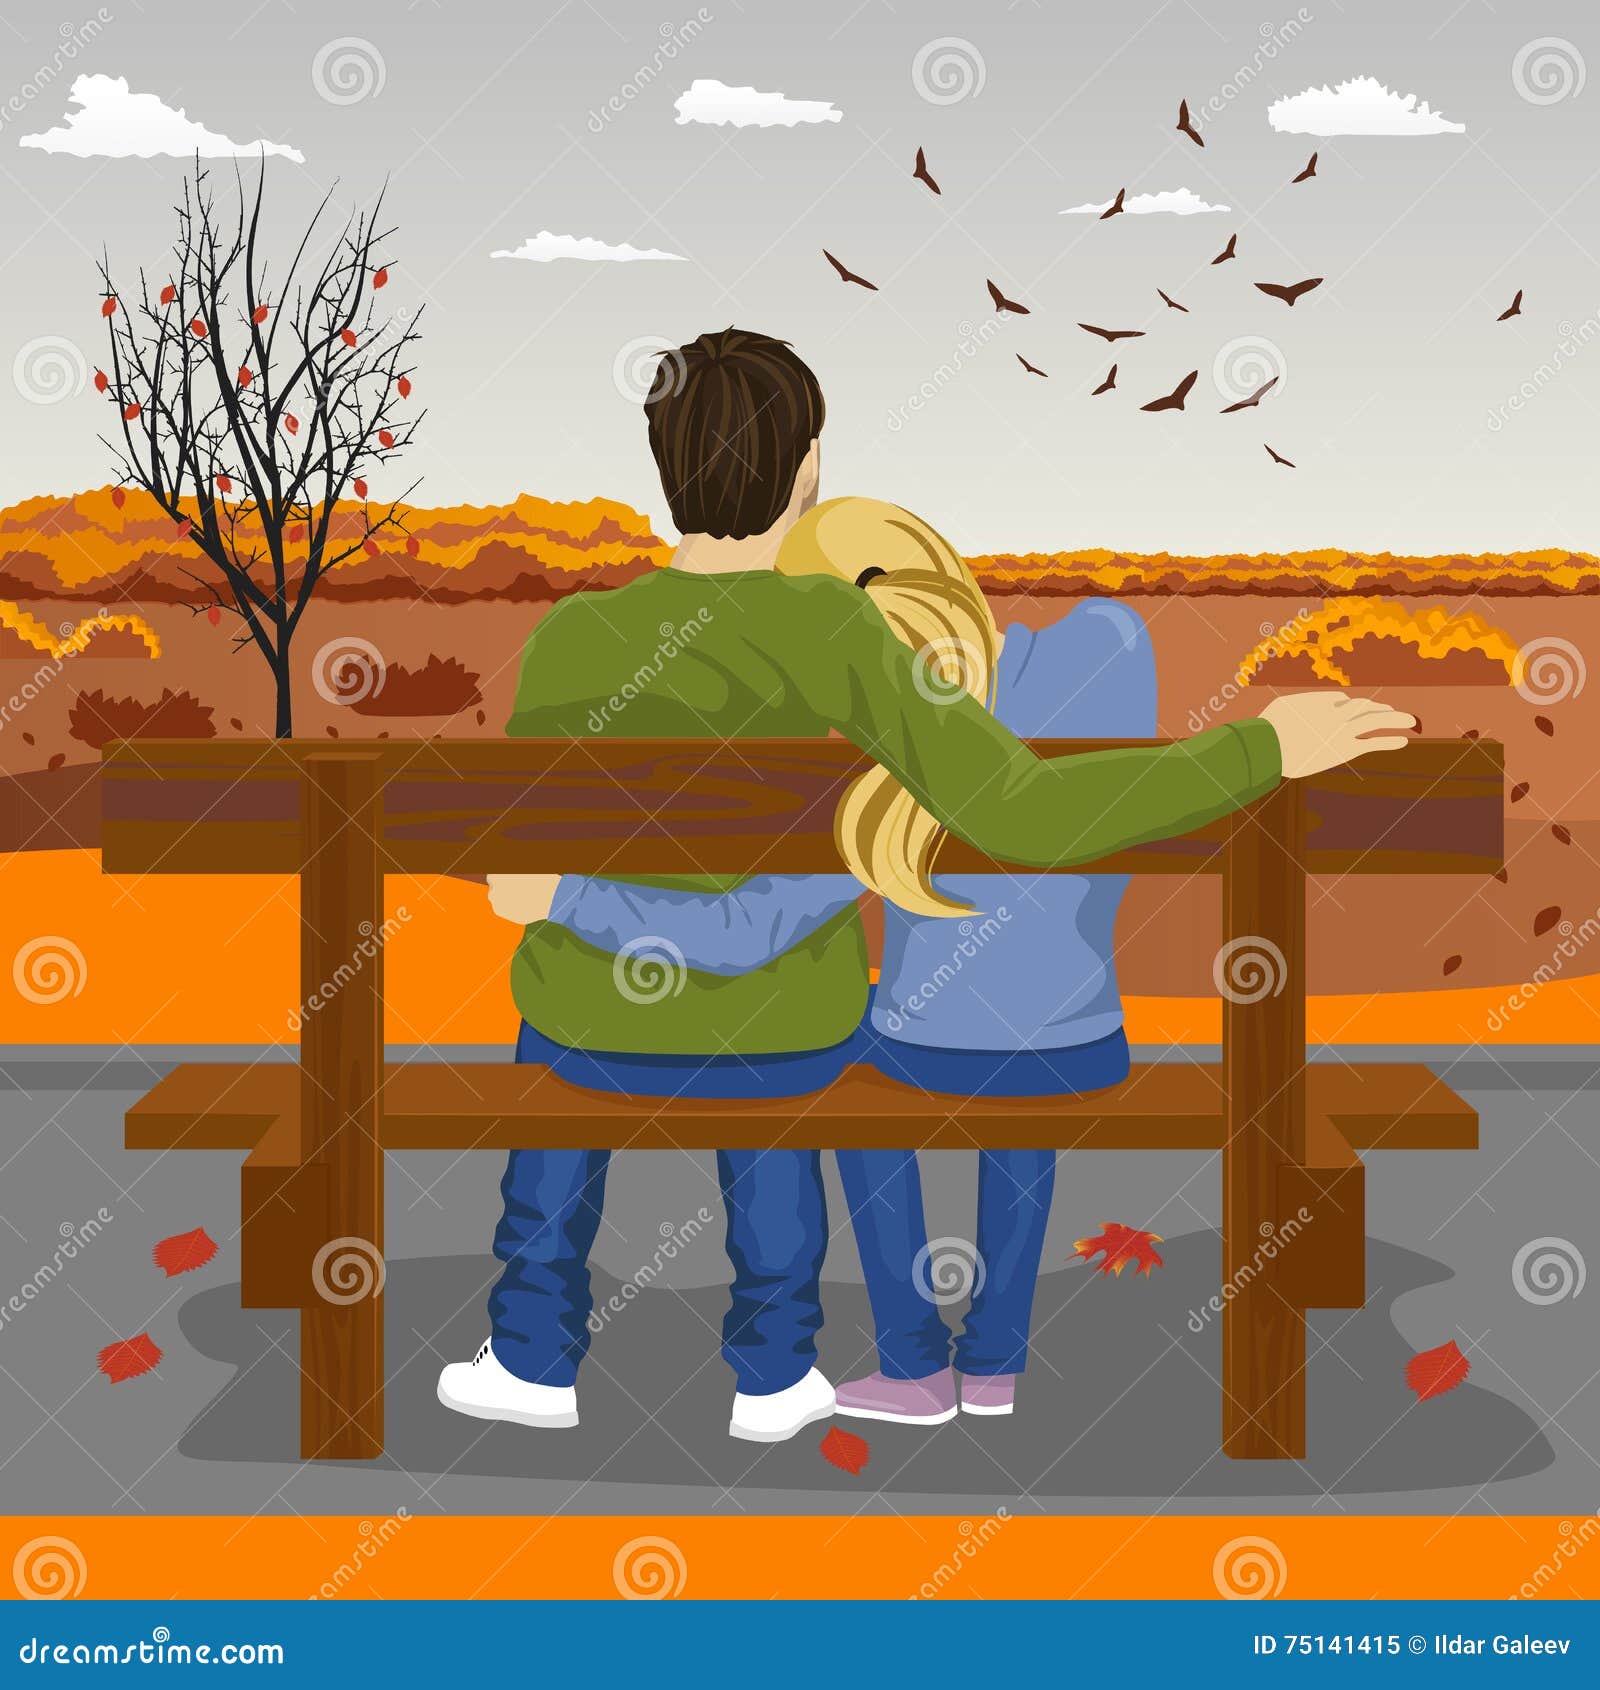 Back View of Young Couple Sitting Together on Bench Outdoors in Autumn  Stock Vector - Illustration of date, happy: 75141415